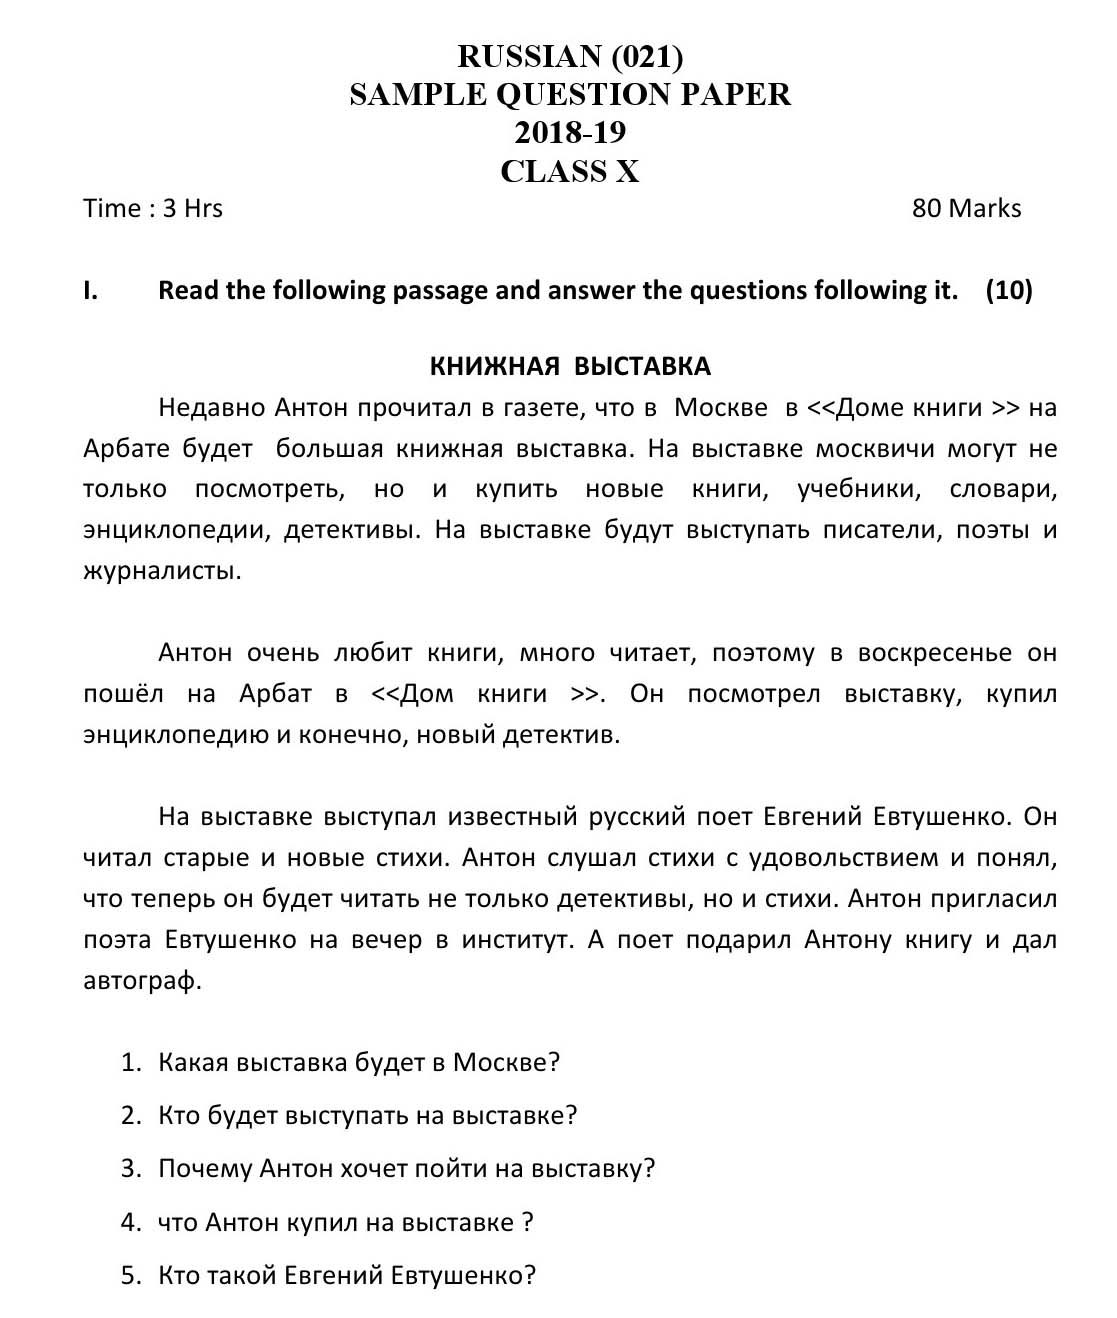 Russian CBSE Class X Sample Question Paper 2018-19 - Image 1